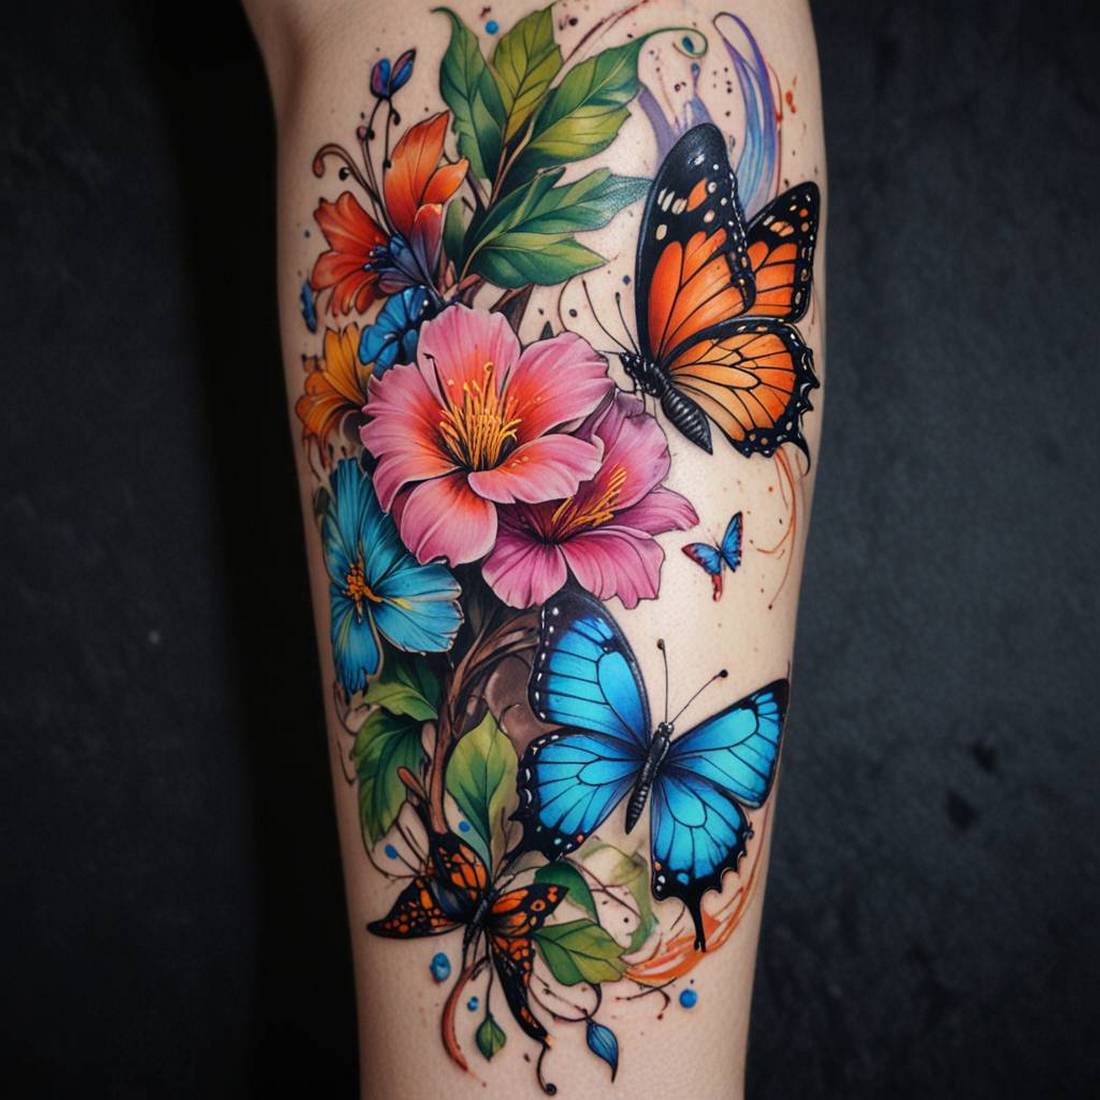 Tattoo Set #5 – Girl, Flowers, Butterflies (52 Sketch) preview image.